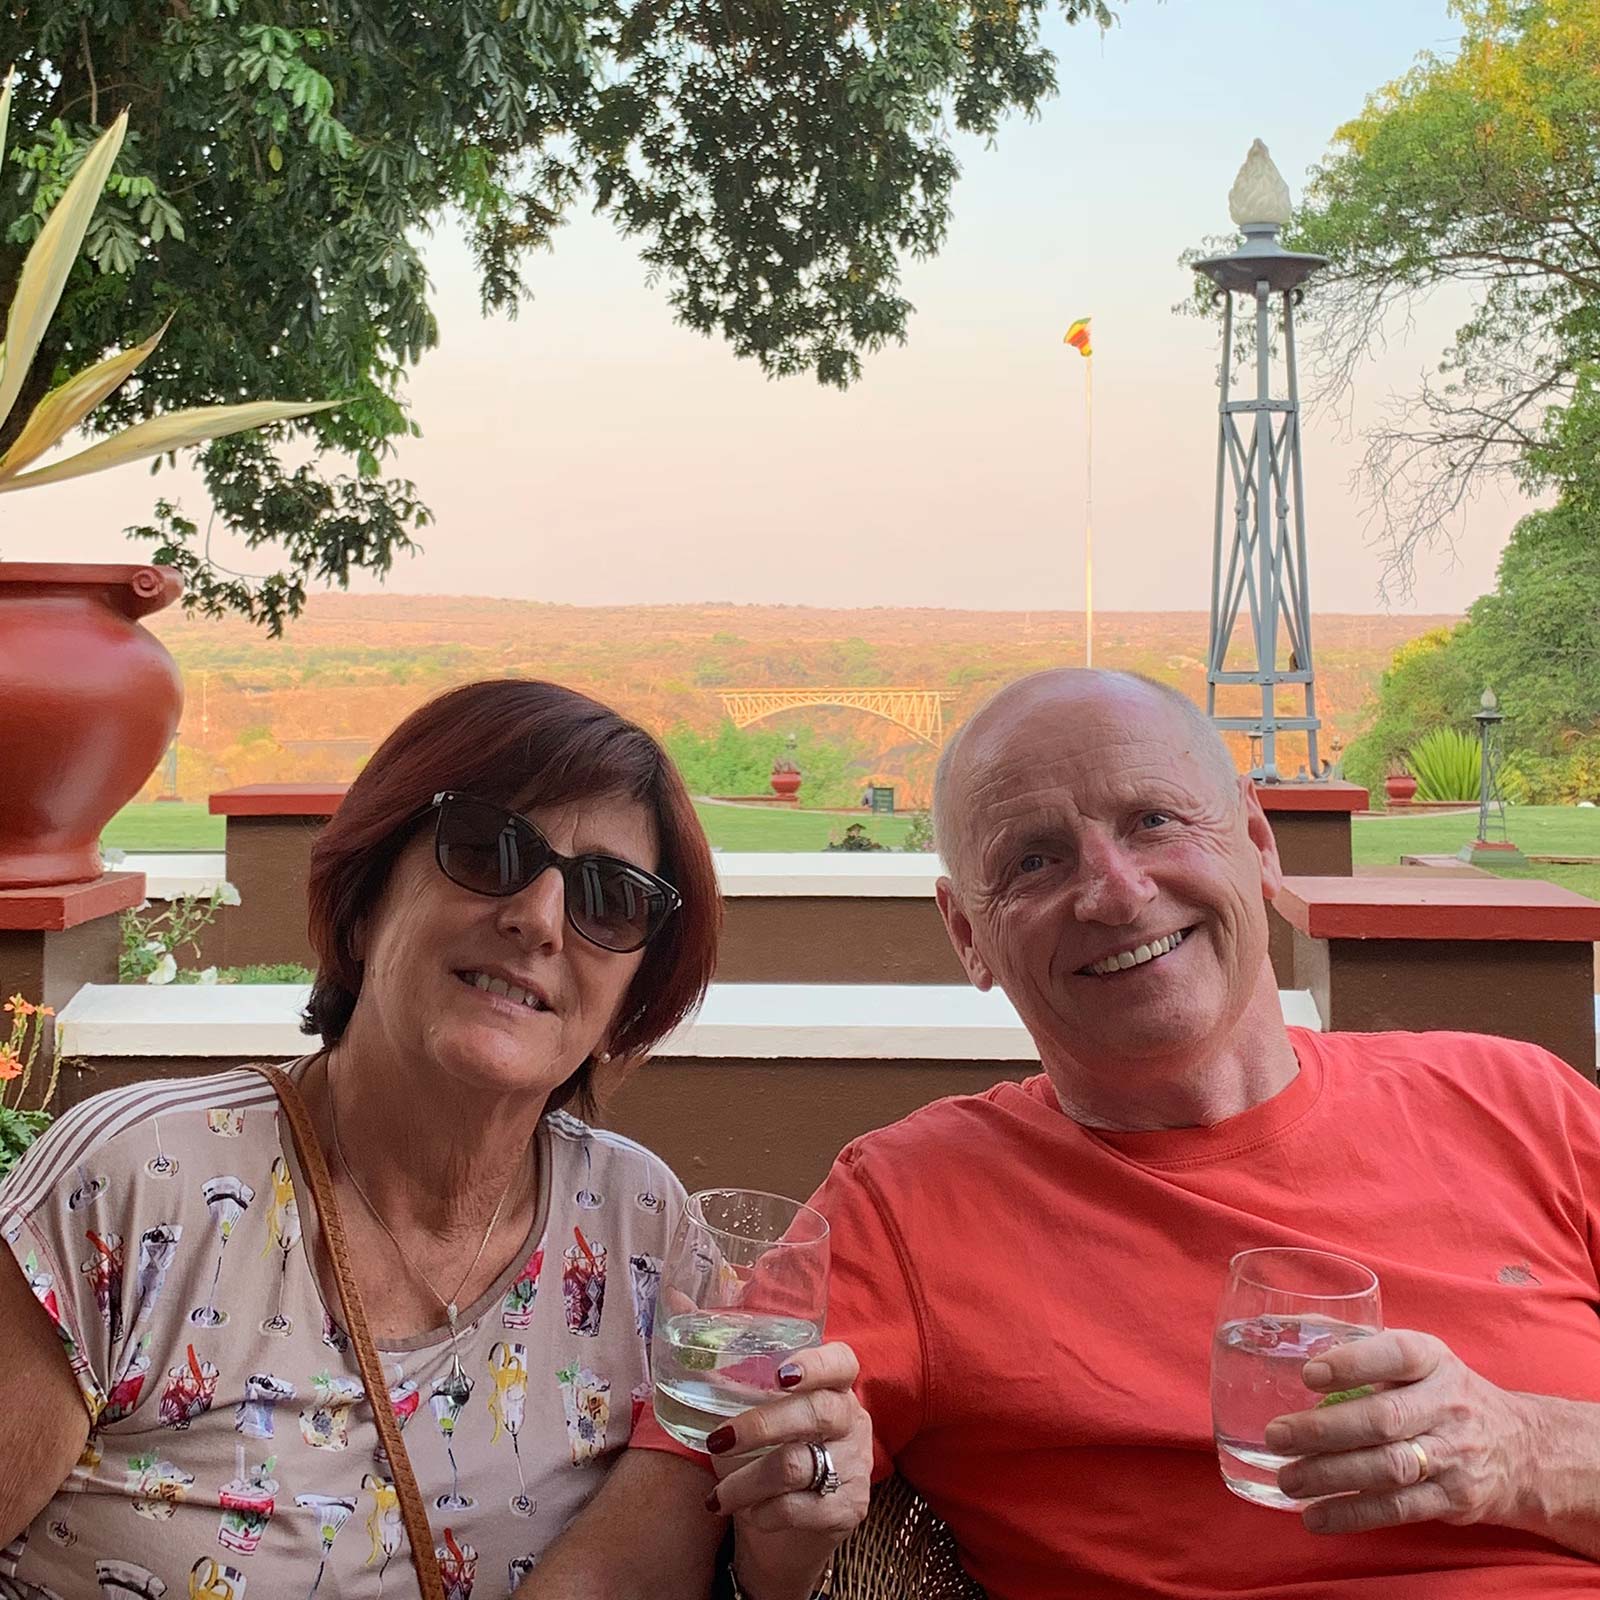 Mom and Dad having drinks in Zimbabwe, Africa. A bloodied nose, cracked rib and saving a life